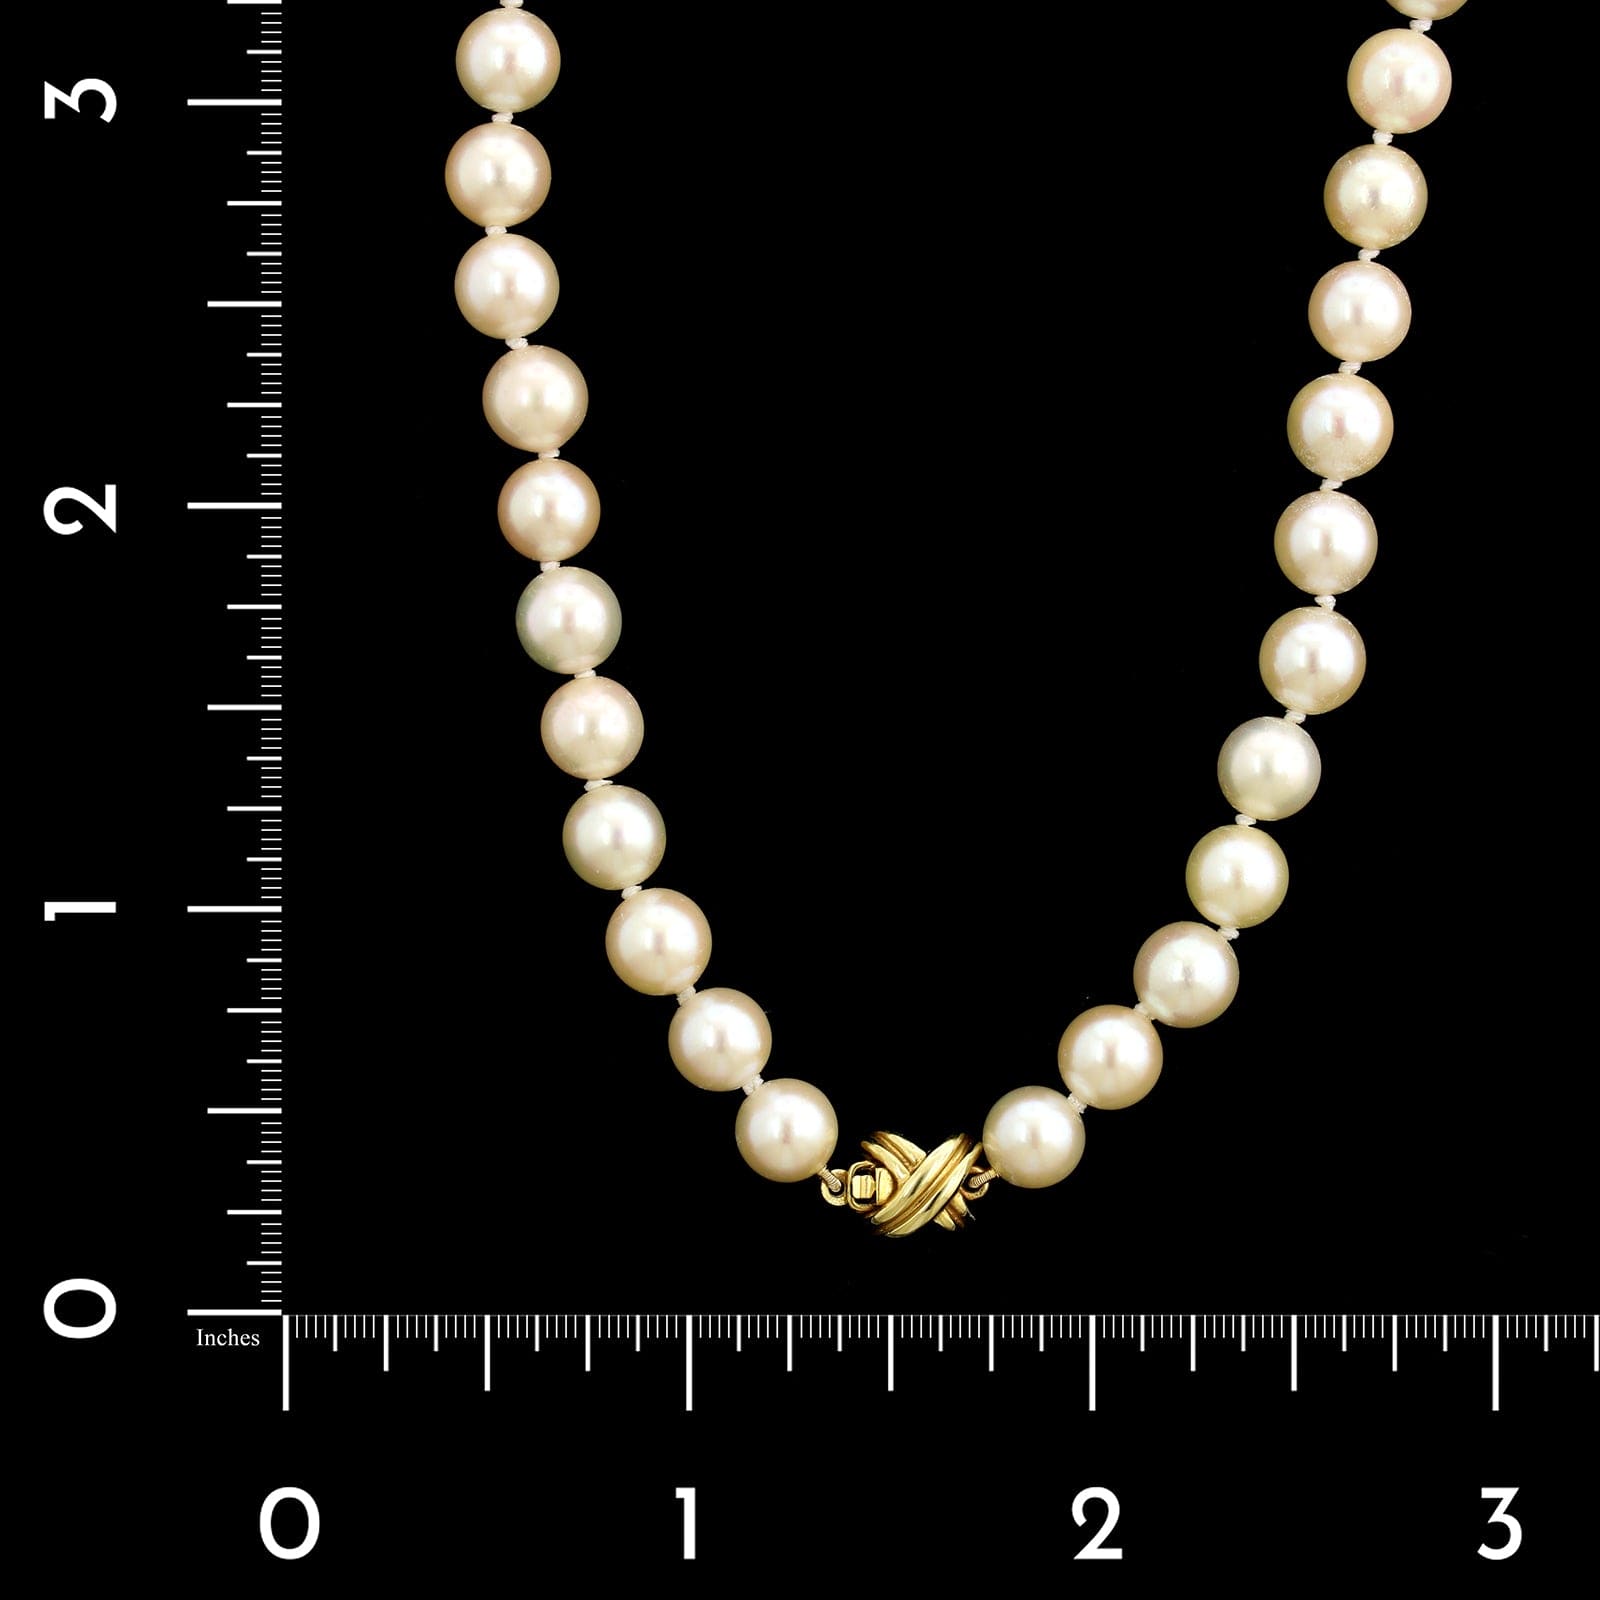 14K Yellow Gold Estate Cultured Pearl Necklace